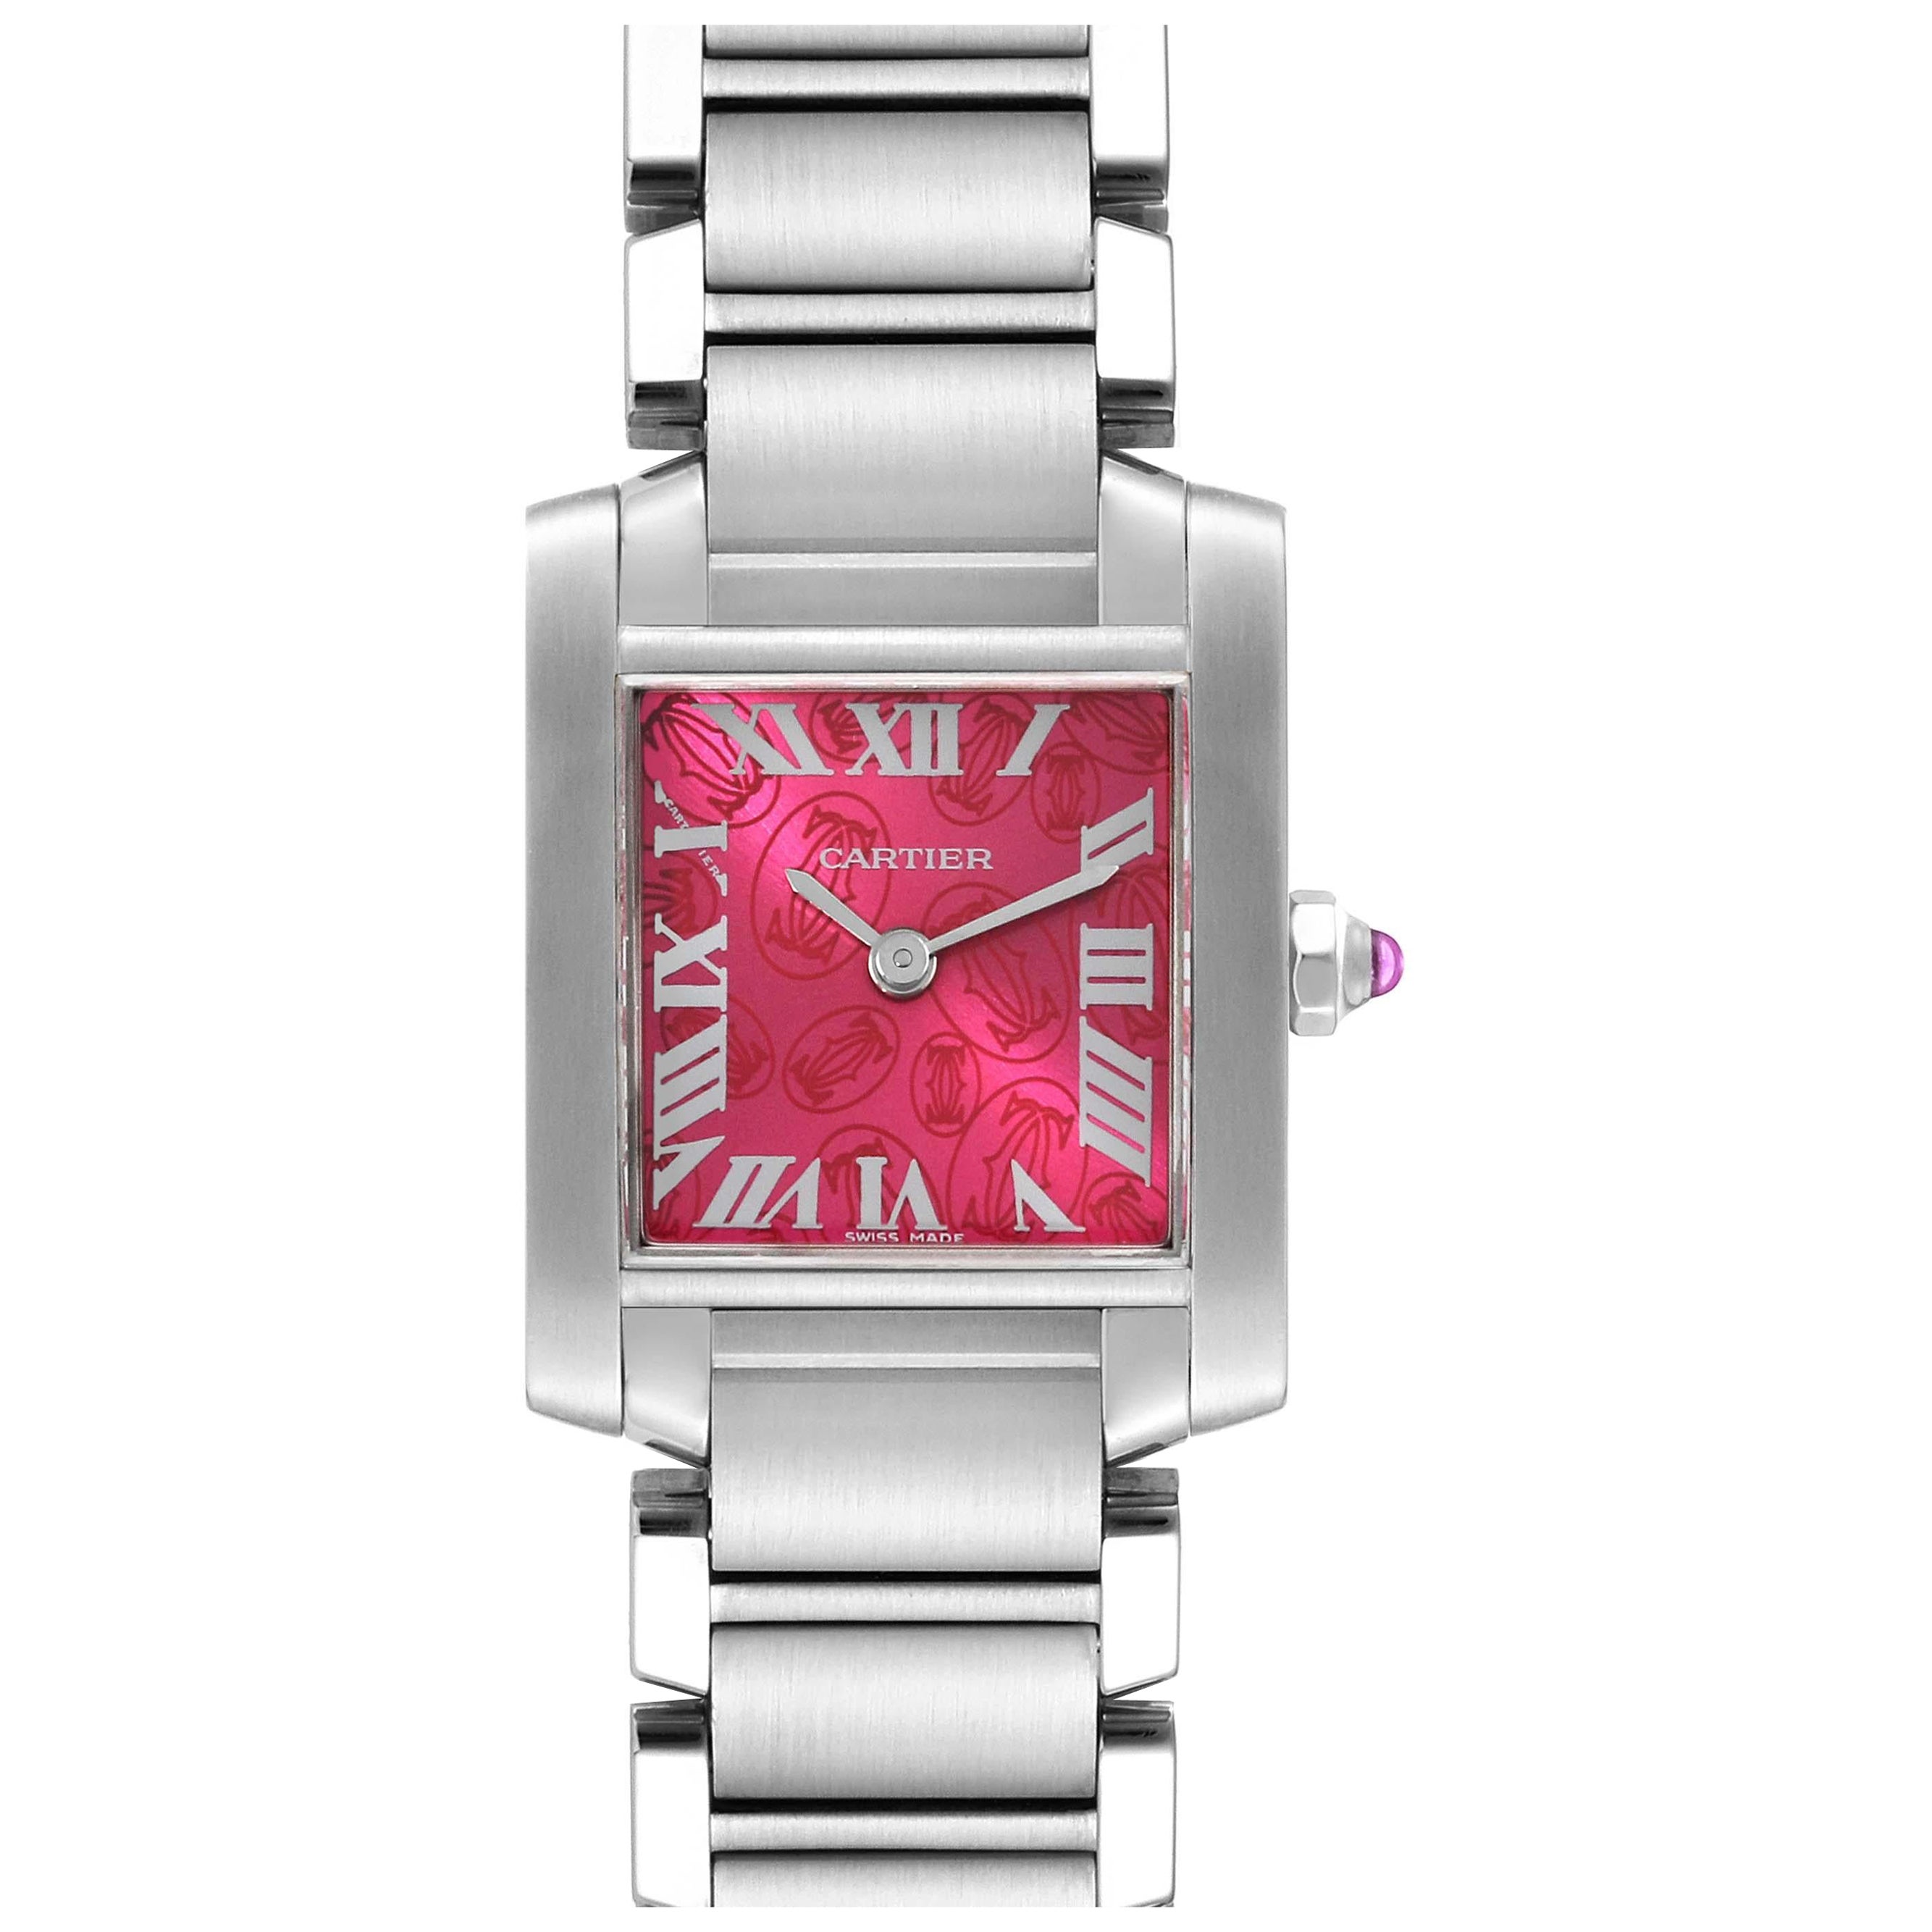 Cartier Tank Francaise Raspberry Dial Limited Edition Steel Watch W51030Q3